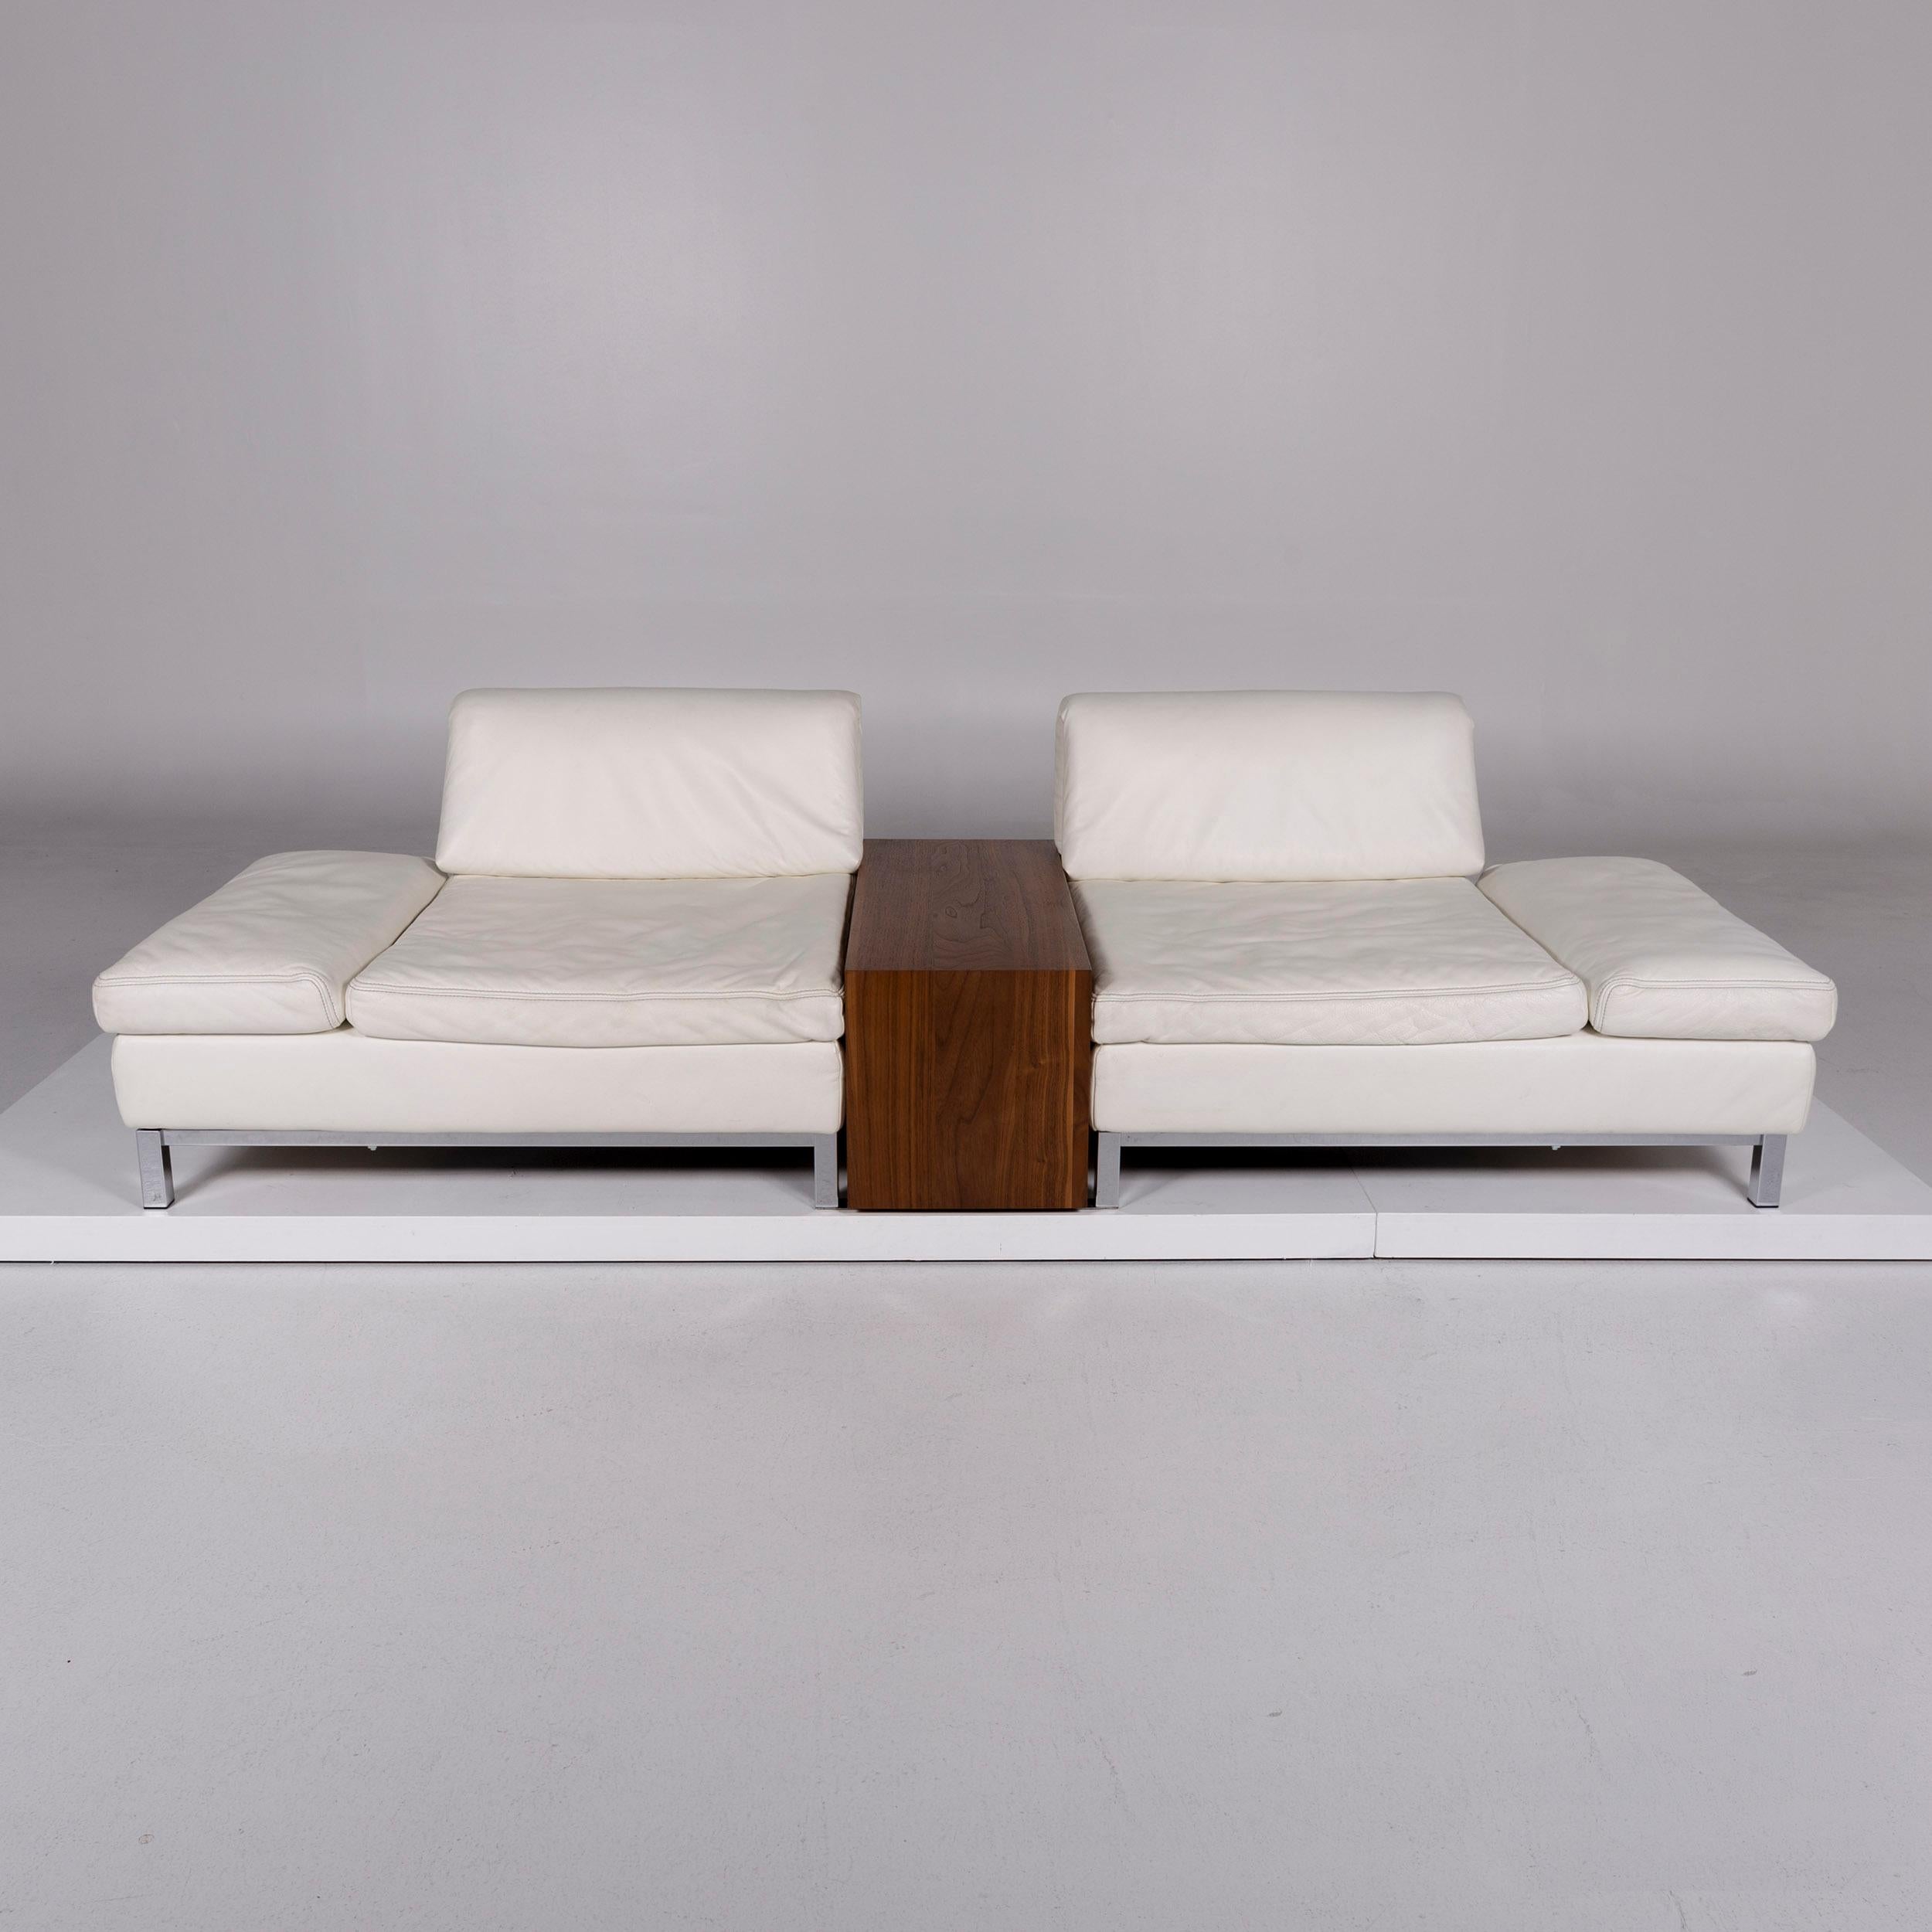 Contemporary Koinor Leather Sofa White Wood Two-Seat Relax Function Function Couch